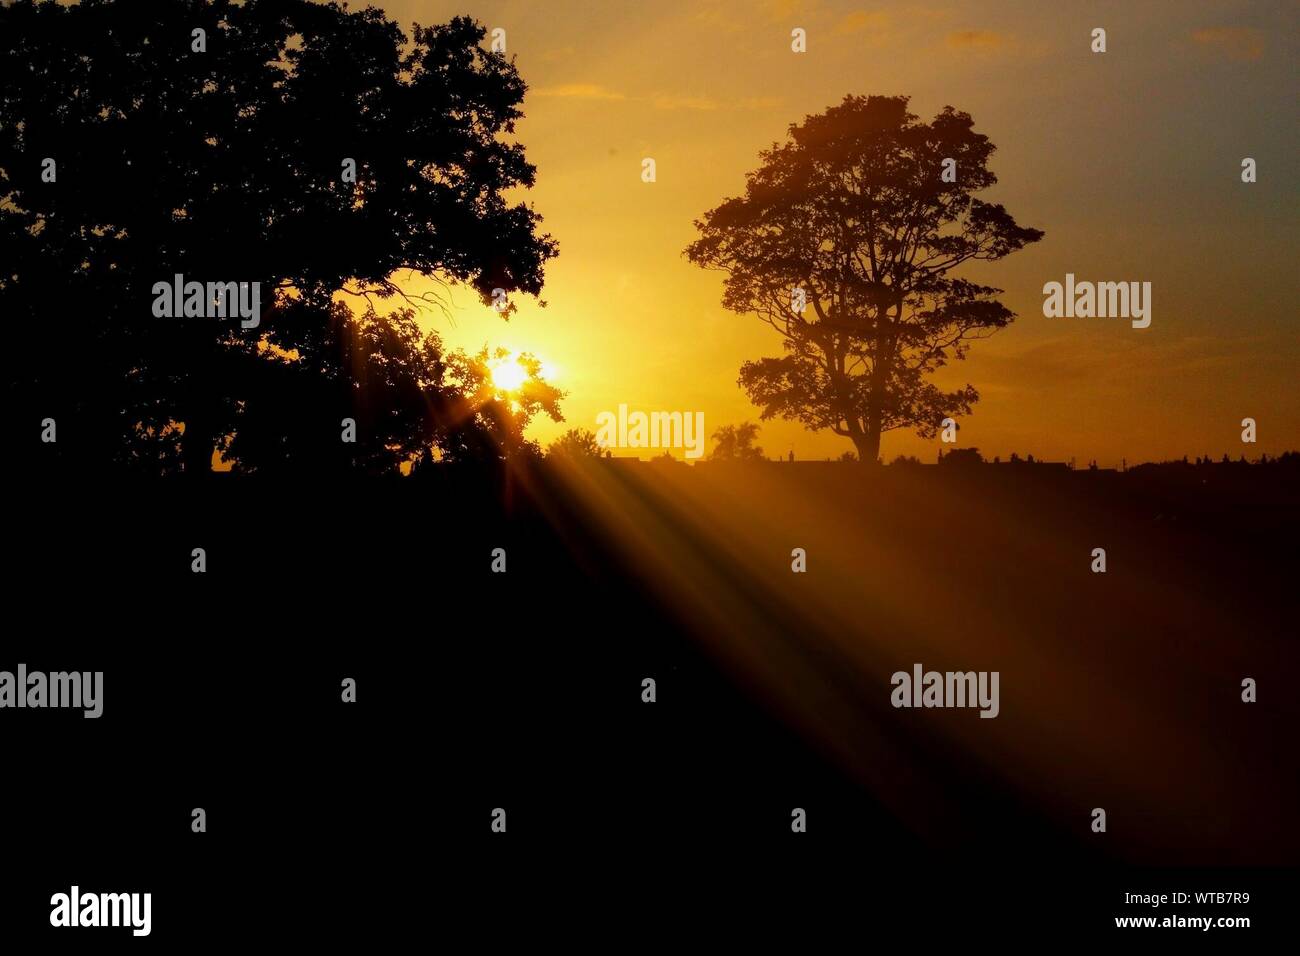 Yellow Sunrise And Tree Silhouettes Stock Photo